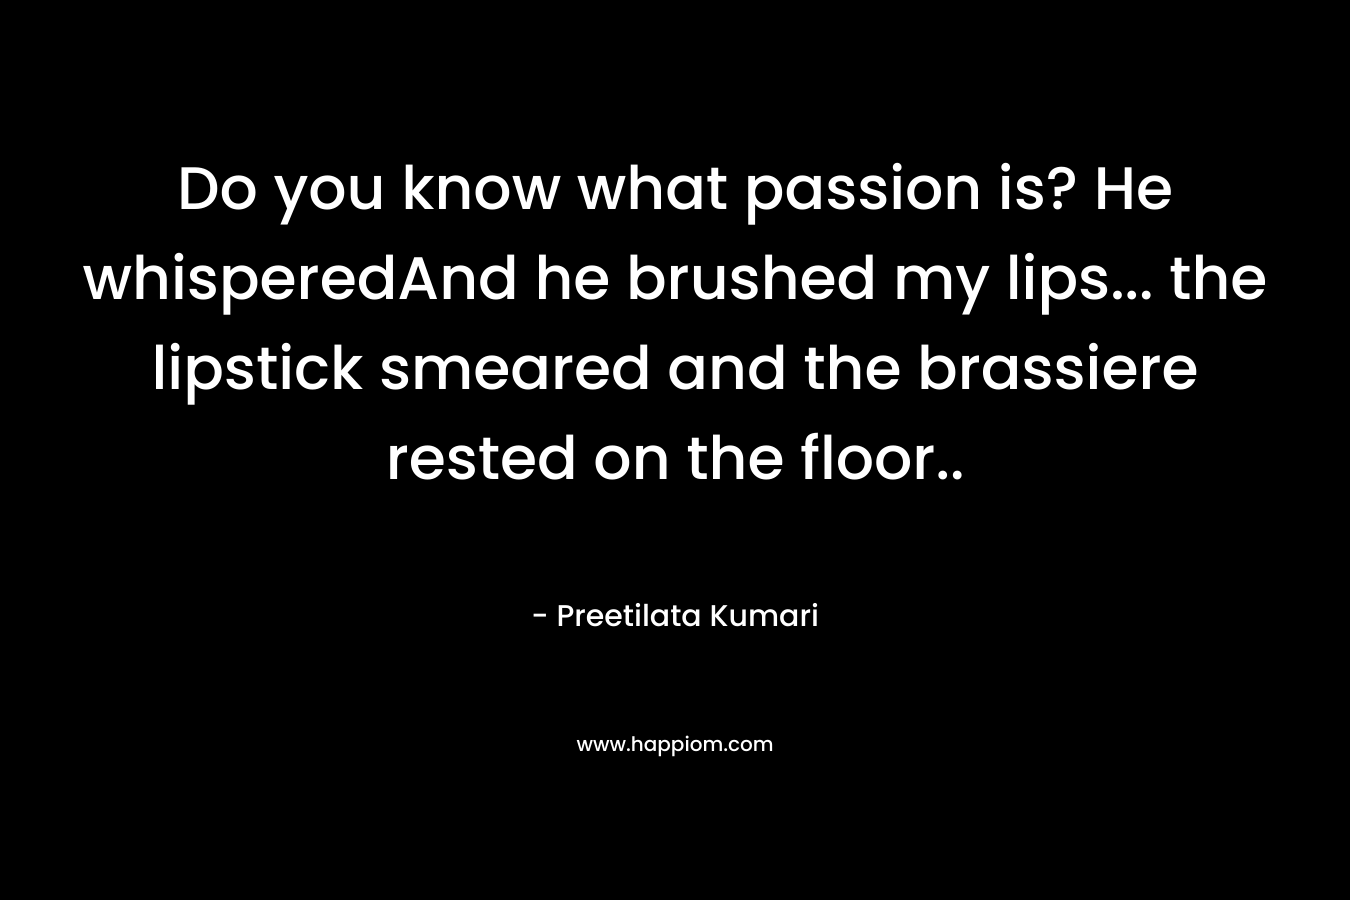 Do you know what passion is? He whisperedAnd he brushed my lips... the lipstick smeared and the brassiere rested on the floor..